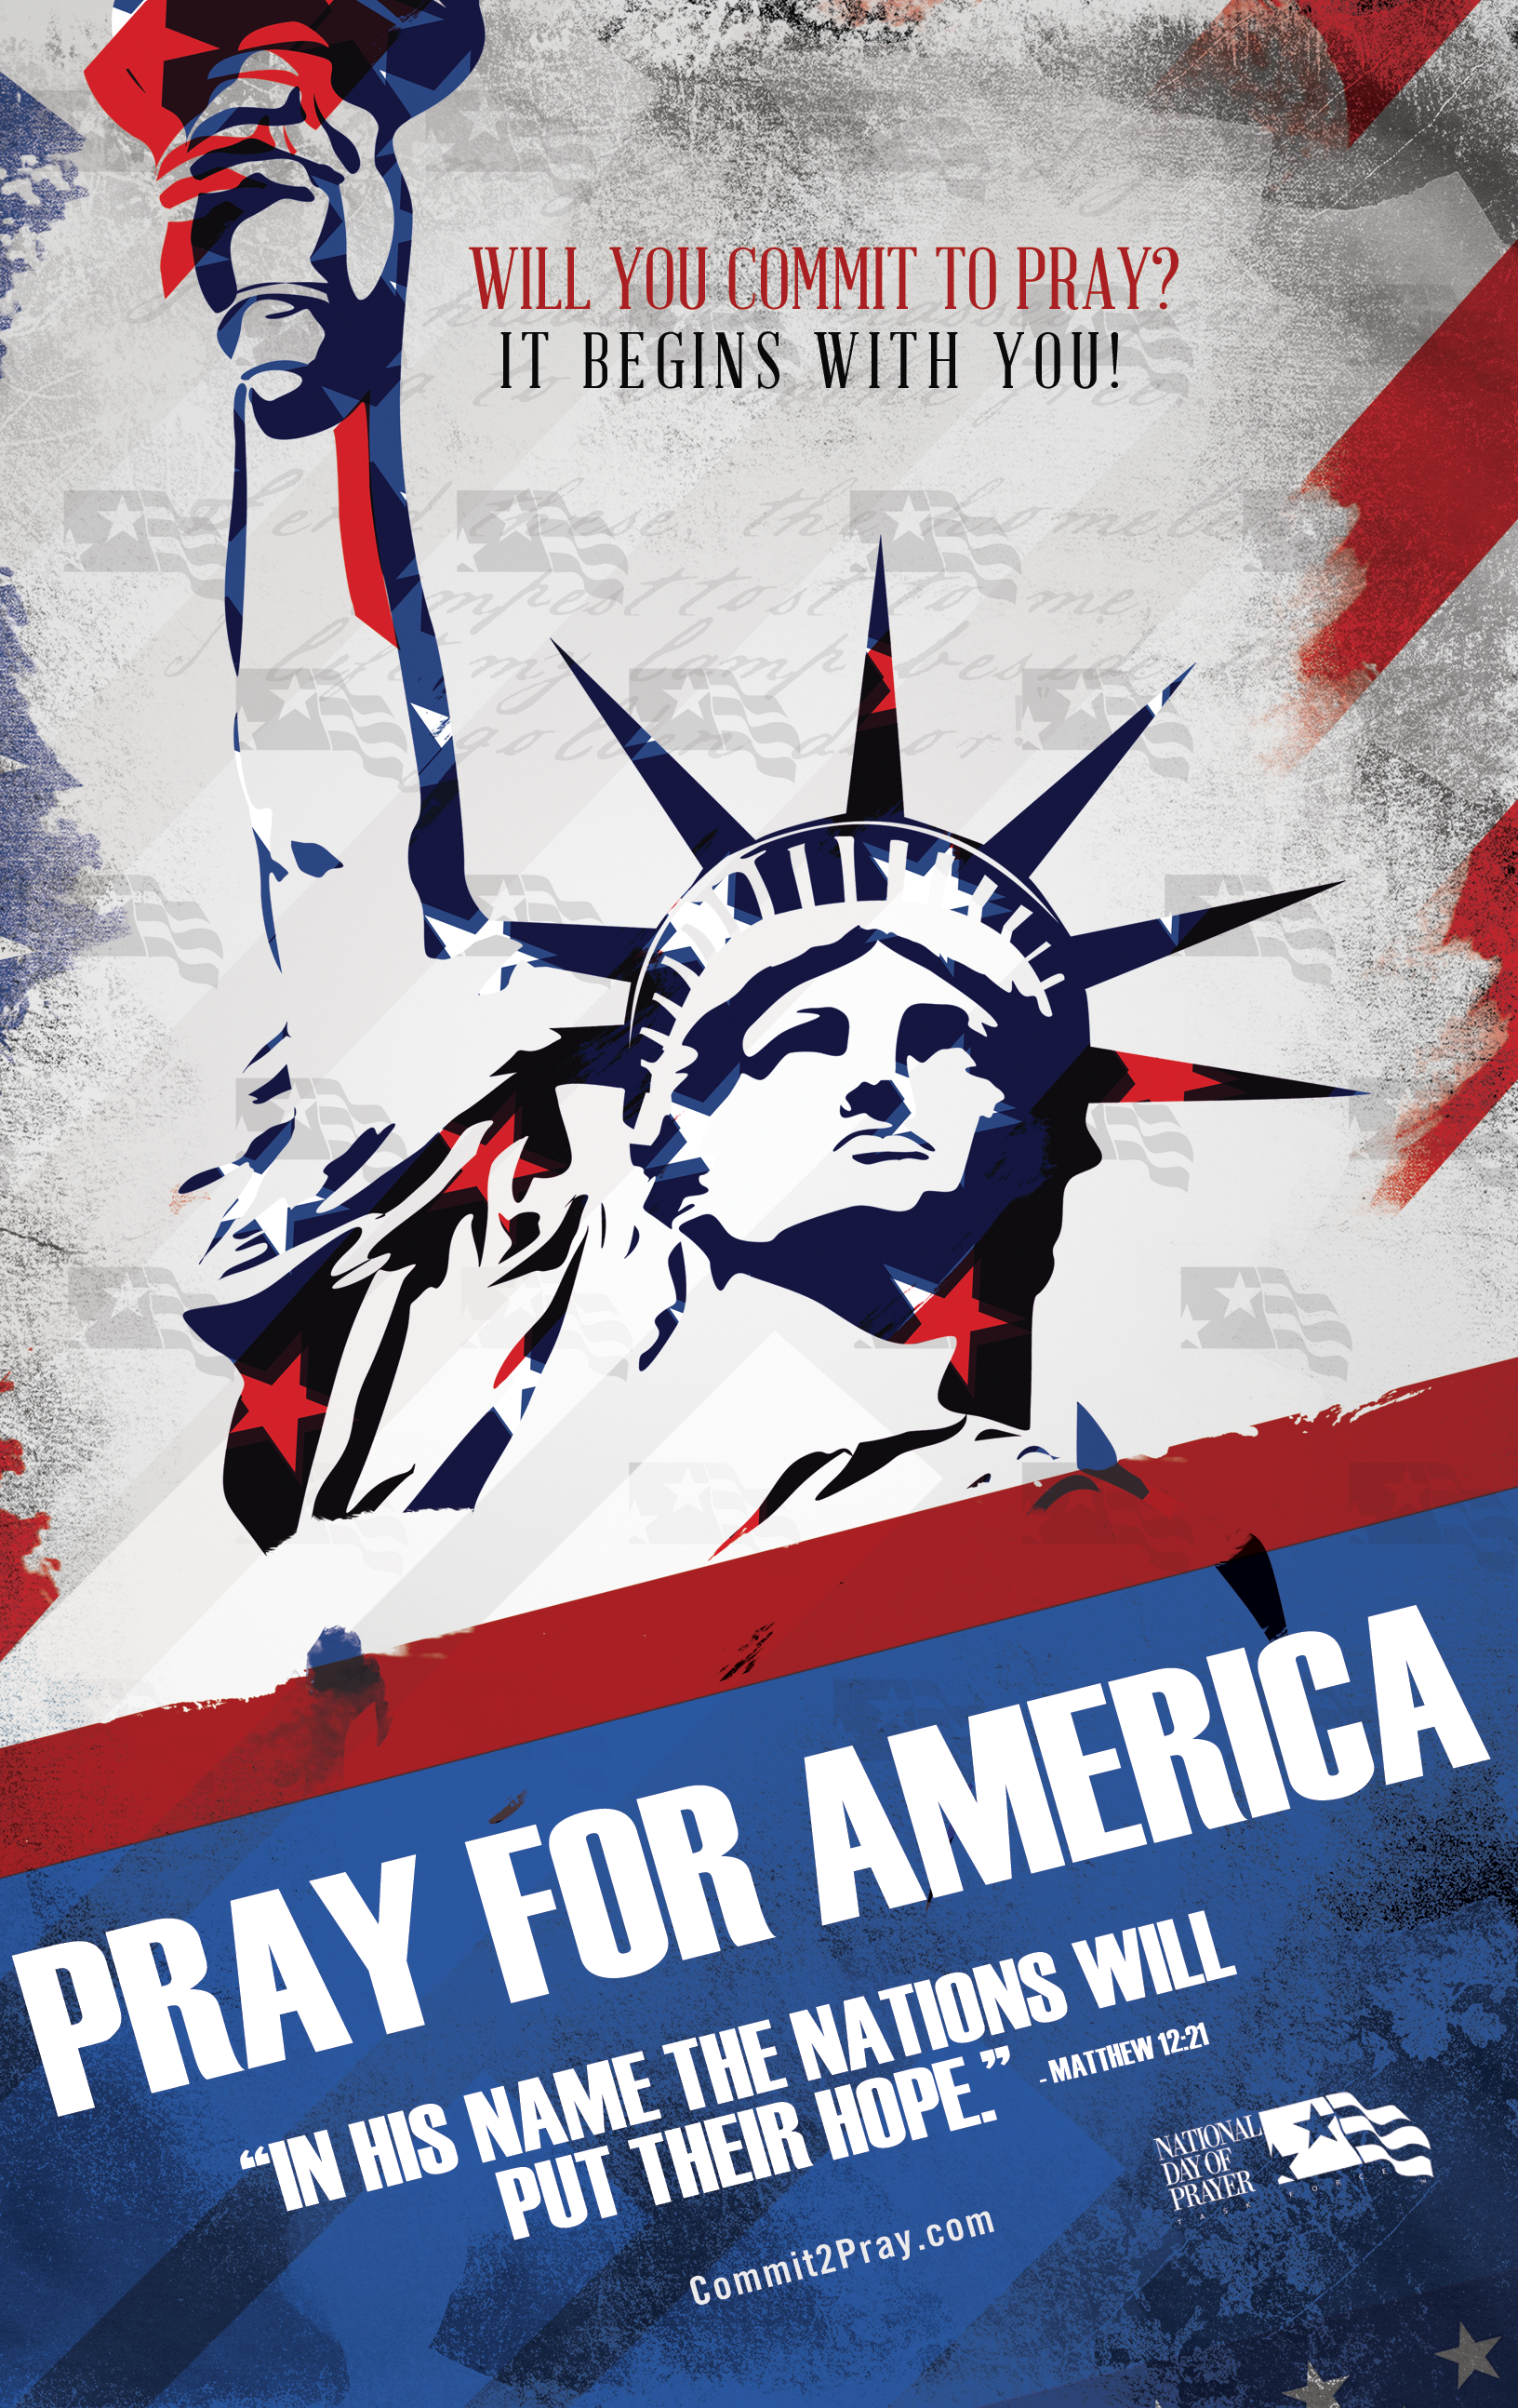 2013 National Day of Prayer Images - DuoParadigms Public Relations